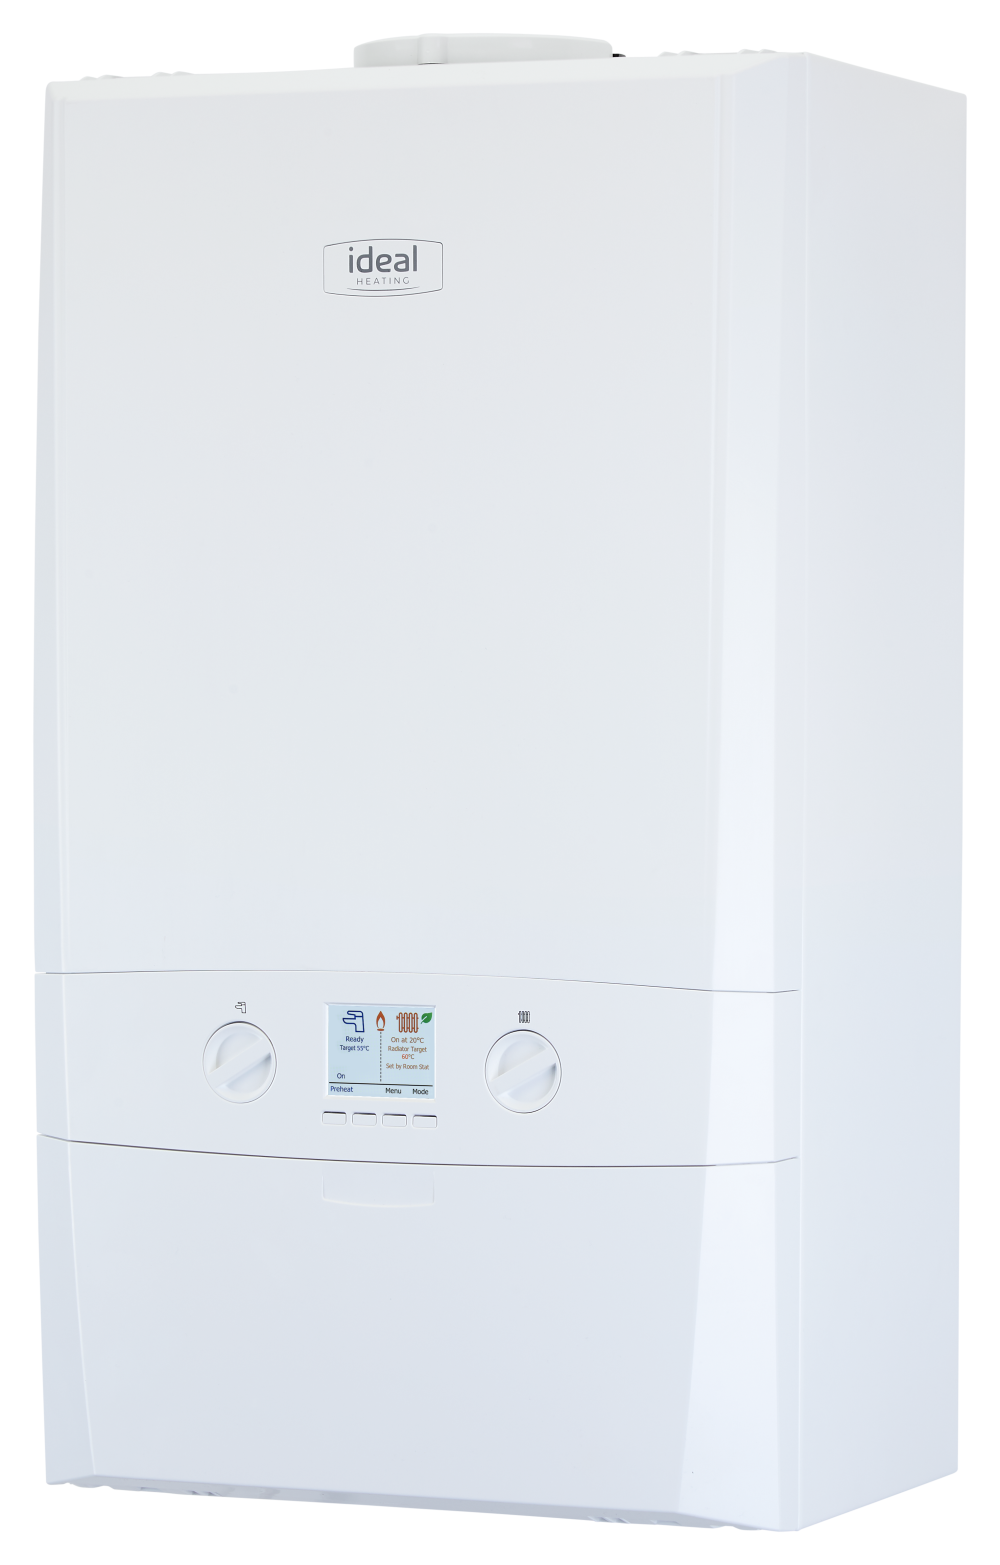 Ideal Logic Max Combi Boilers featured image